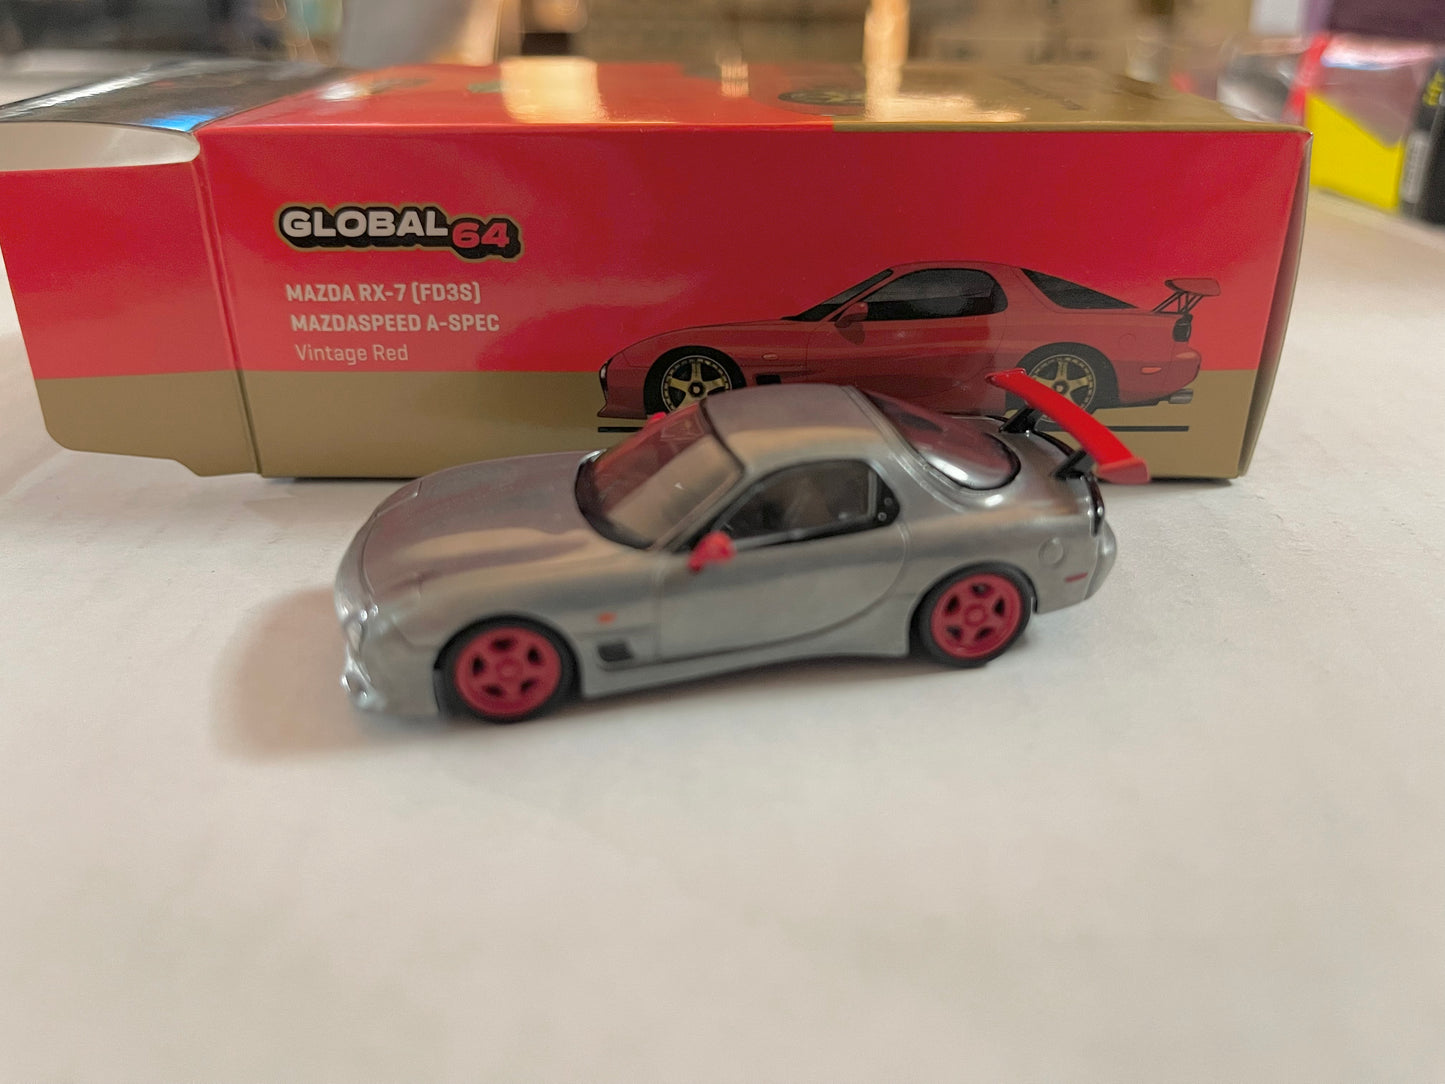 Tarmac Works 1:64 Mazda RX-7 (FD3S) Hong Kong Special Edition Red Global64 *CHASE*